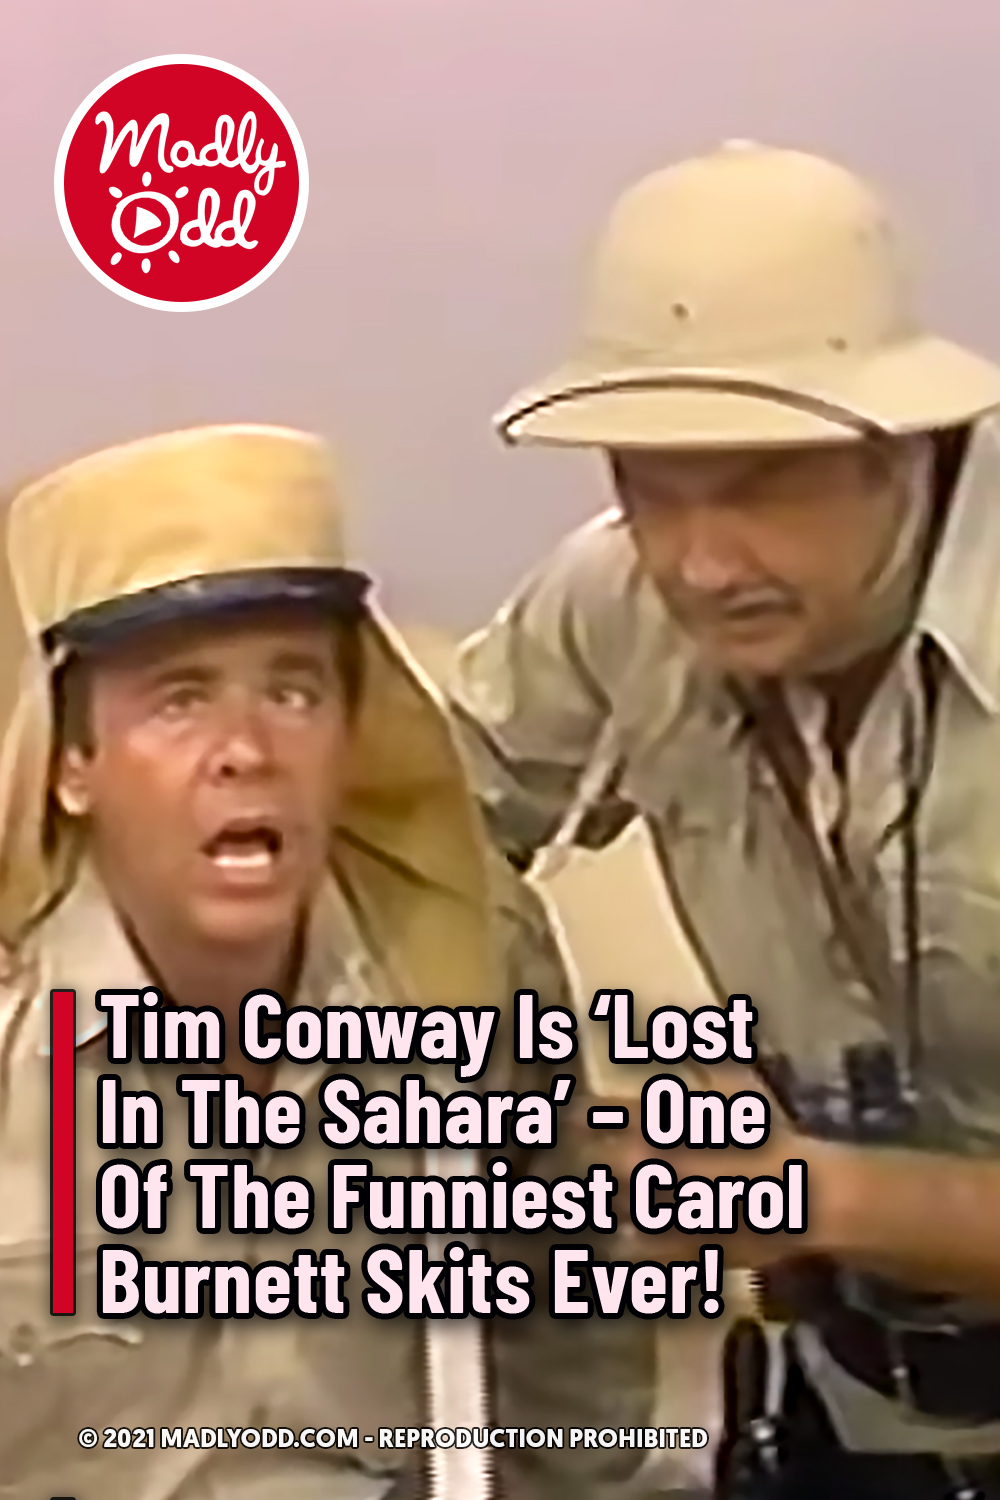 Tim Conway Is ‘Lost In The Sahara’ - One Of The Funniest Carol Burnett Skits Ever!